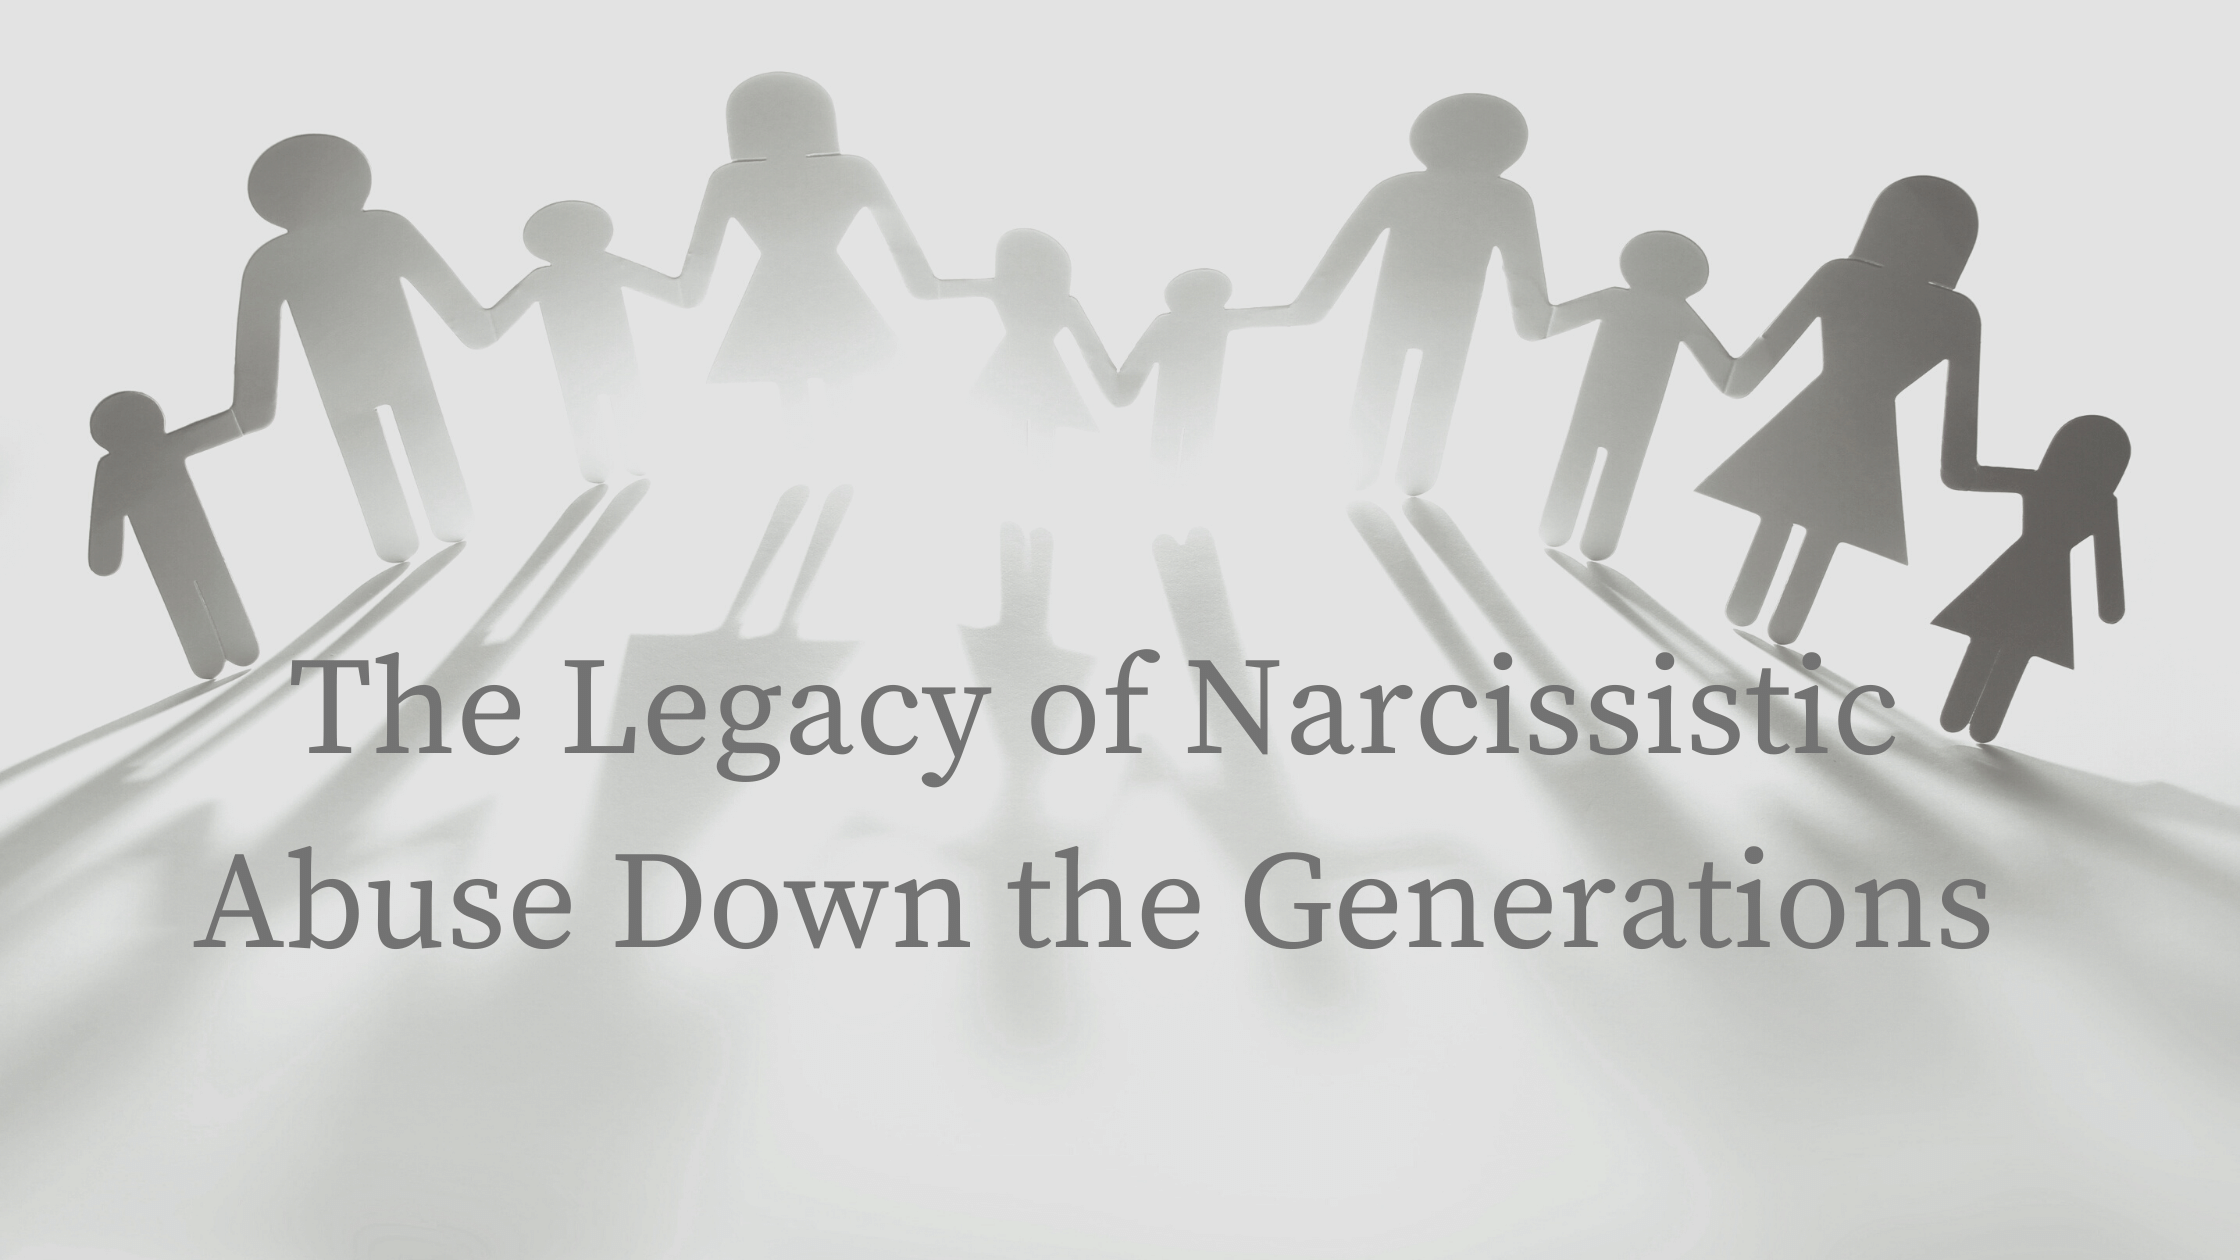 the legacy of narcissism through the generations